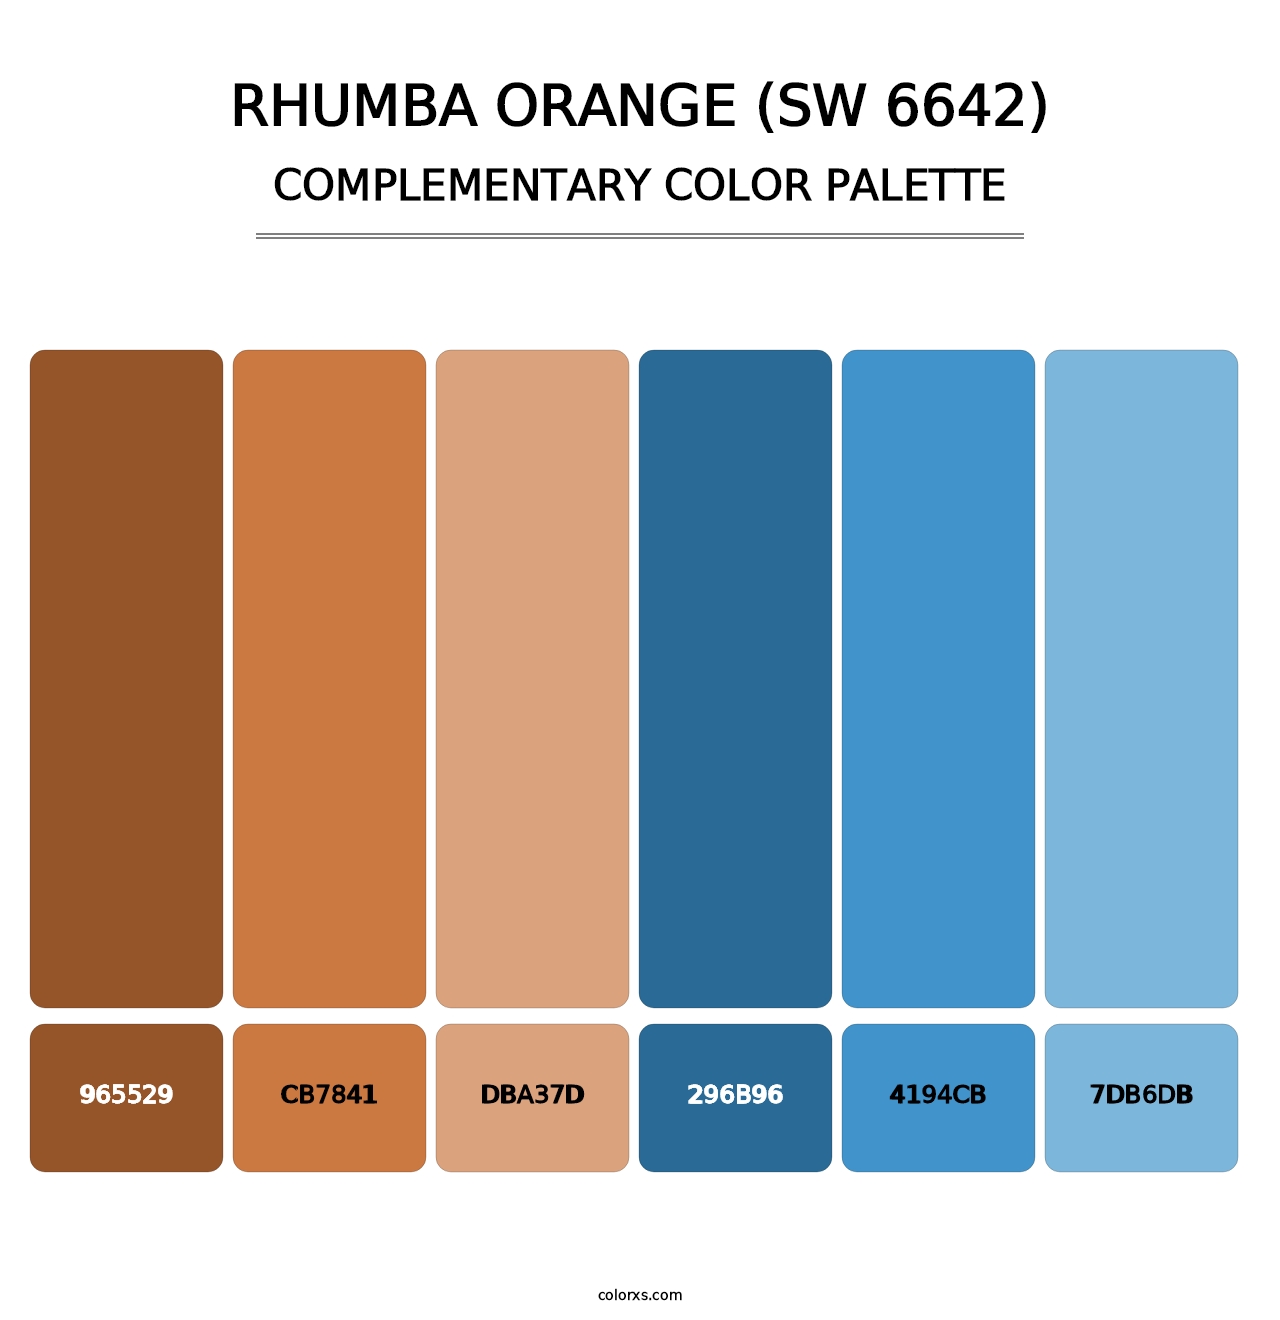 Rhumba Orange (SW 6642) - Complementary Color Palette